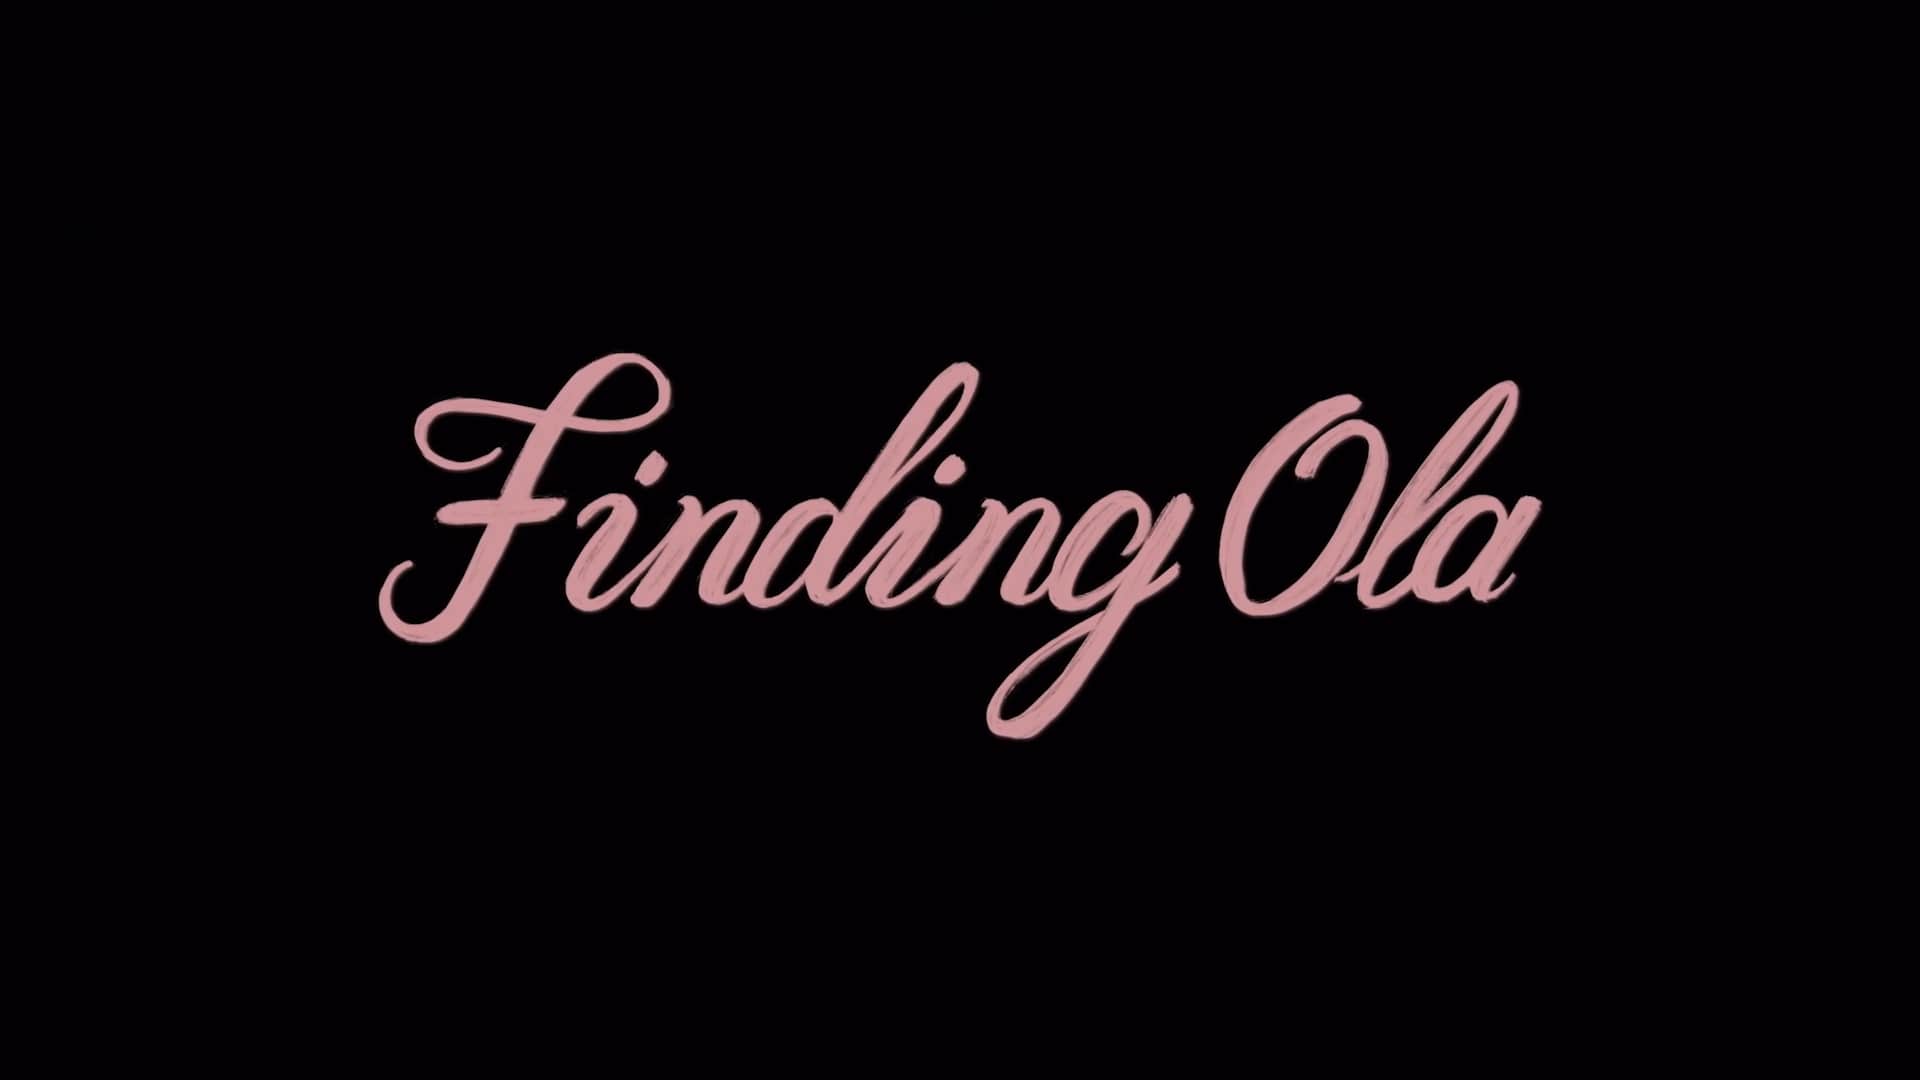 Finding Ola Trailer, Coming to Netflix in February 2022